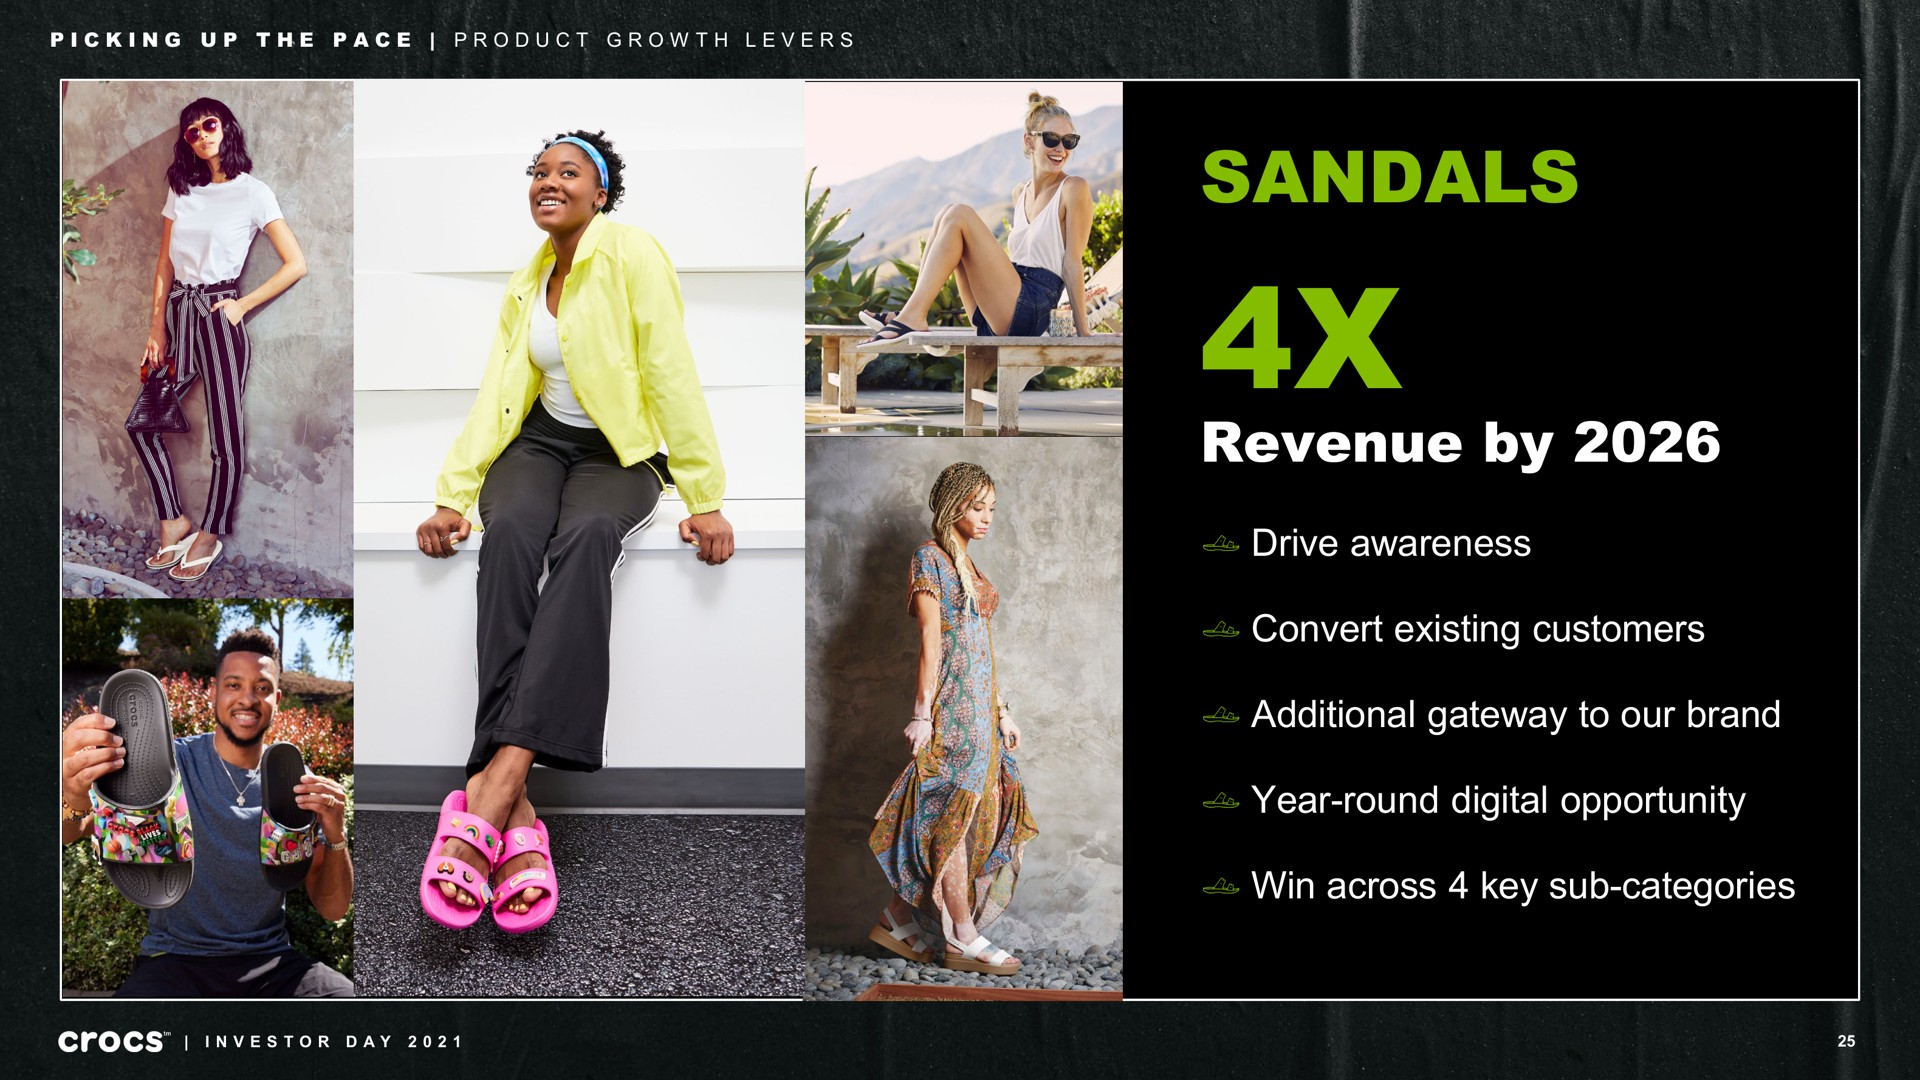 sandals revenue by drive awareness convert existing customers additional gateway to our brand year round digital opportunity win across key sub categories picking up the pace product growth levers investor day | Crocs